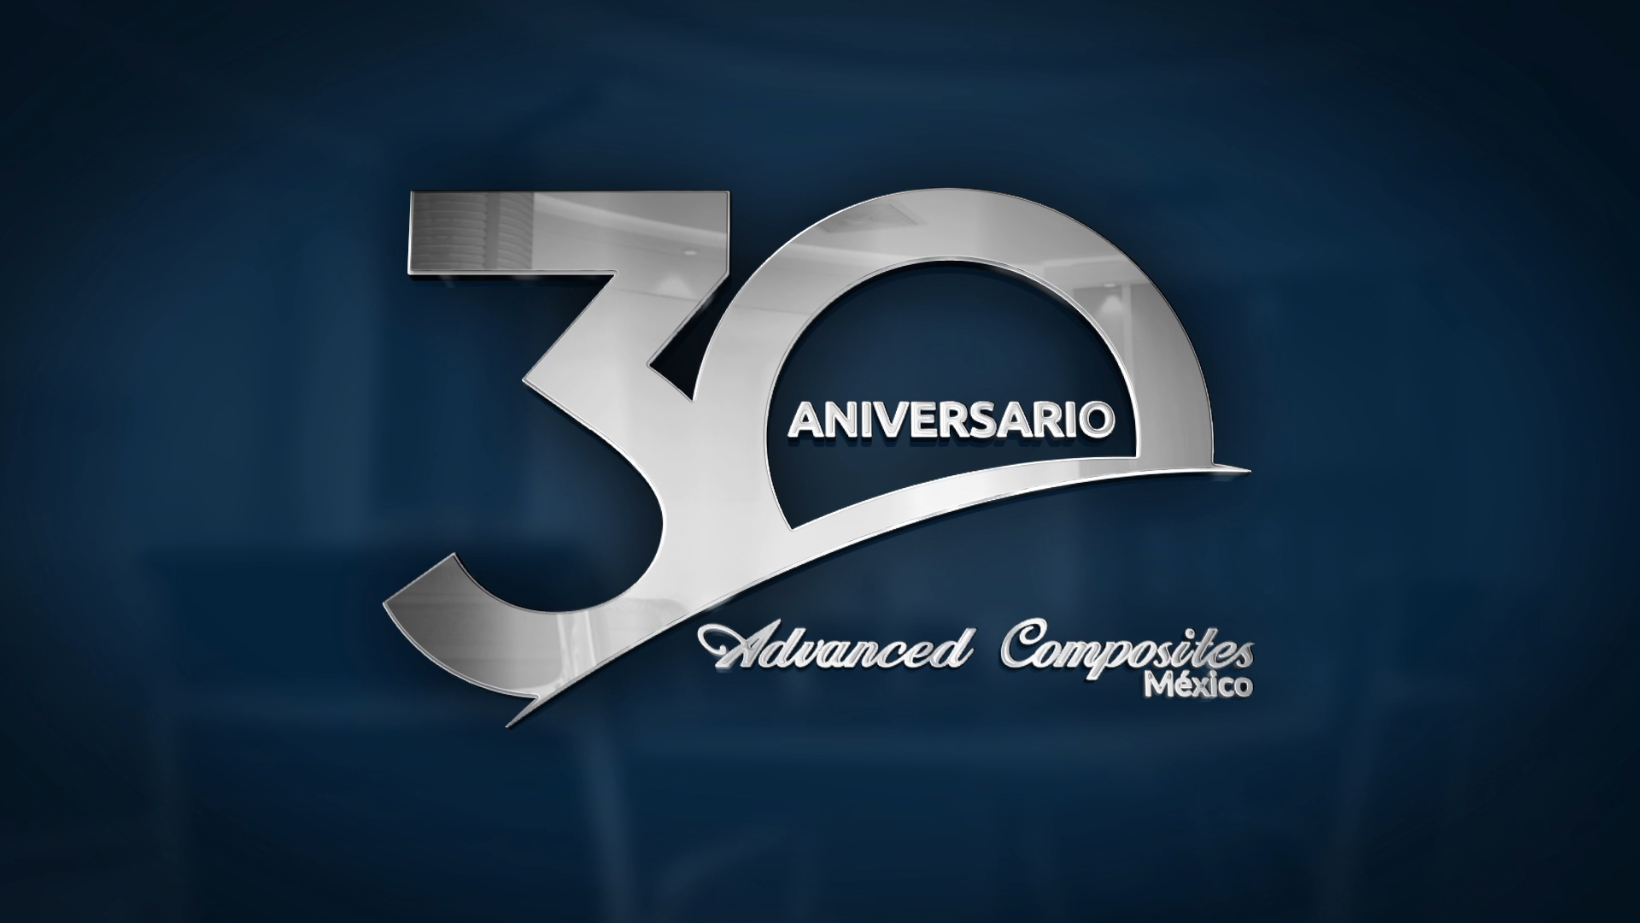 We celebrate 30 years of innovation and excellence at Advanced Composites Mexico!